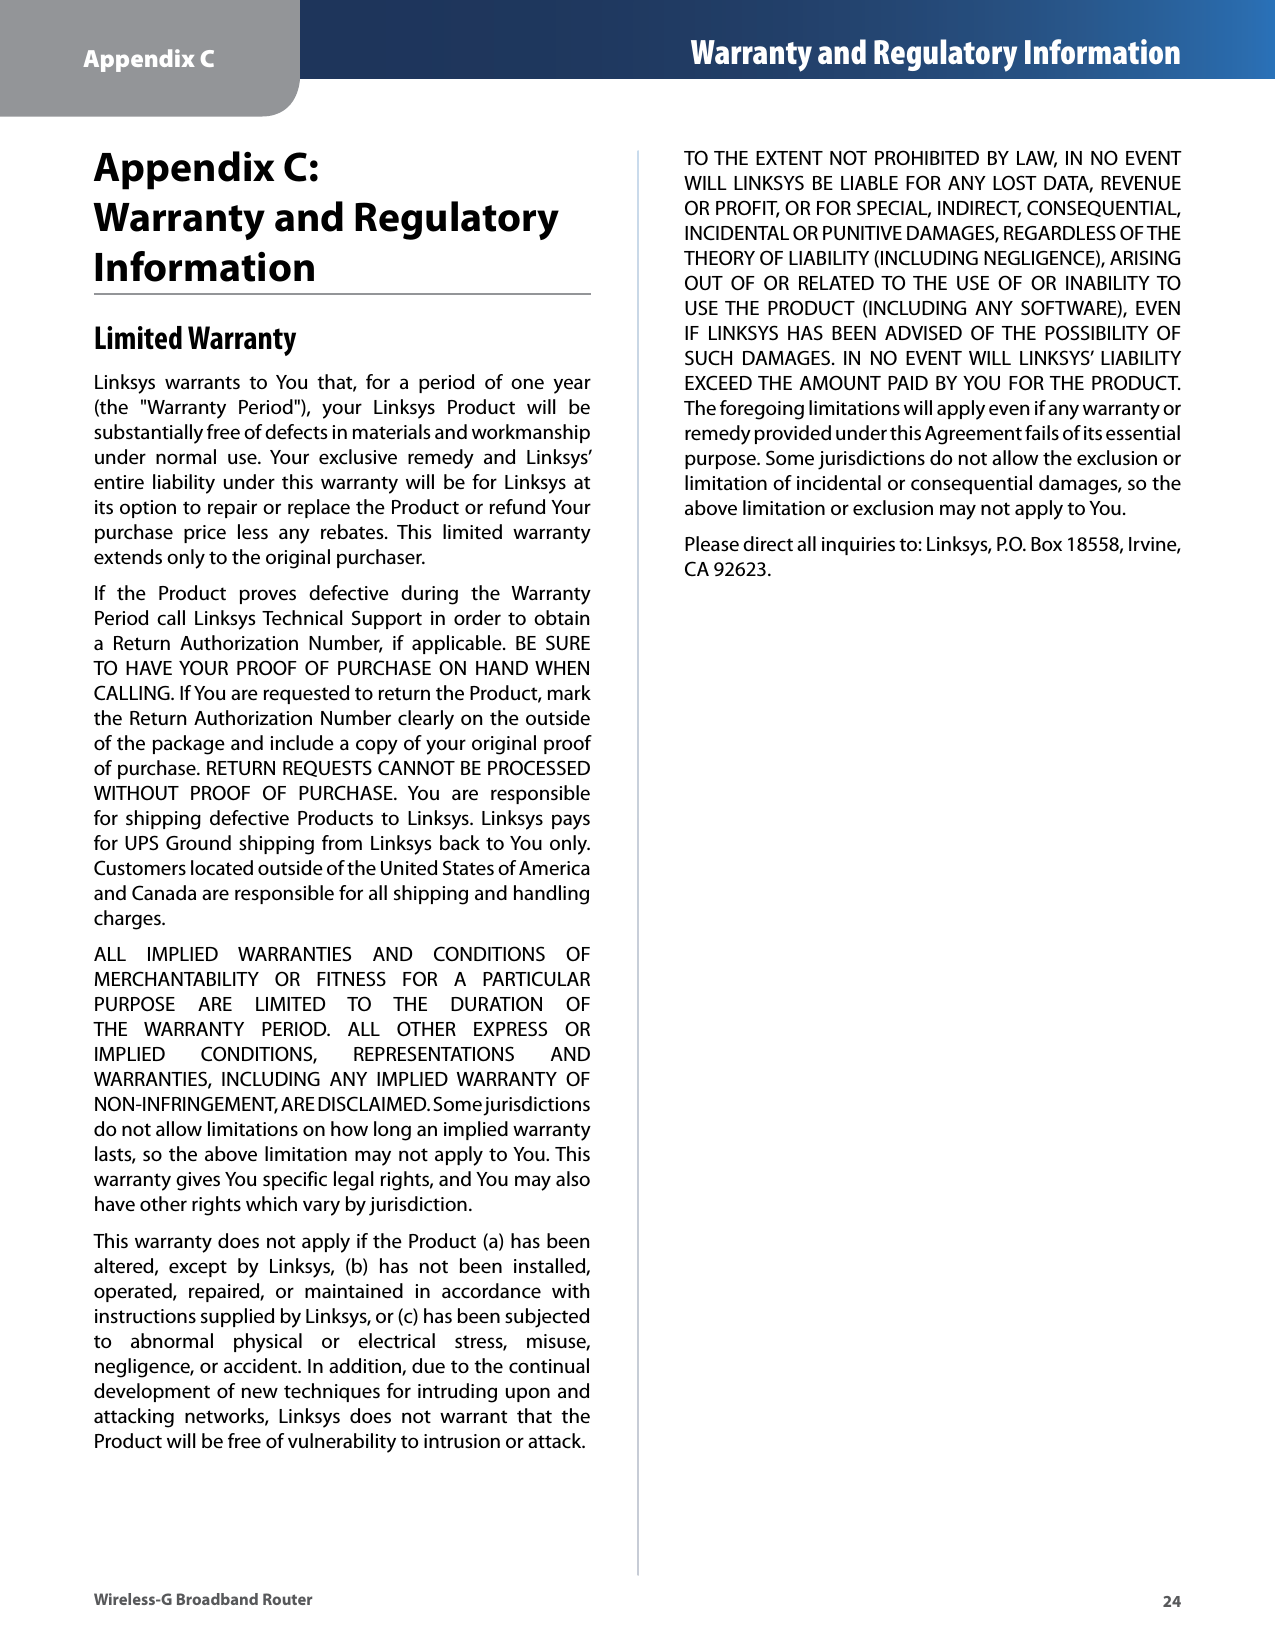 Appendix C Warranty and Regulatory Information Appendix C: Warranty and Regulatory Information Limited Warranty Linksys  warrants  to  You  that,  for  a  period  of  one  year (the  &quot;Warranty  Period&quot;),  your  Linksys  Product  will  be substantially free of defects in materials and workmanship under  normal  use.  Your  exclusive  remedy  and  Linksys’ entire liability  under  this warranty  will  be  for Linksys  at its option to repair or replace the Product or refund Your purchase  price  less  any  rebates.  This  limited  warranty extends only to the original purchaser. If  the  Product  proves  defective  during  the  Warranty Period call  Linksys Technical  Support  in  order  to  obtain a  Return  Authorization  Number,  if  applicable.  BE  SURE TO  HAVE YOUR  PROOF  OF  PURCHASE  ON  HAND WHEN CALLING. If You are requested to return the Product, mark the Return Authorization Number clearly on the outside of the package and include a copy of your original proof of purchase. RETURN REQUESTS CANNOT BE PROCESSED WITHOUT  PROOF  OF  PURCHASE.  You  are  responsible for  shipping  defective  Products  to Linksys.  Linksys  pays for UPS Ground shipping from Linksys back to You only. Customers located outside of the United States of America and Canada are responsible for all shipping and handling charges. ALL  IMPLIED  WARRANTIES  AND  CONDITIONS  OF MERCHANTABILITY  OR  FITNESS  FOR  A  PARTICULAR PURPOSE  ARE  LIMITED  TO  THE  DURATION  OF THE  WARRANTY  PERIOD.  ALL  OTHER  EXPRESS  OR IMPLIED  CONDITIONS,  REPRESENTATIONS  AND WARRANTIES,  INCLUDING  ANY  IMPLIED  WARRANTY  OF NON-INFRINGEMENT, ARE DISCLAIMED. Some jurisdictions do not allow limitations on how long an implied warranty lasts, so the above limitation may not apply to You. This warranty gives You specific legal rights, and You may also have other rights which vary by jurisdiction. This warranty does not apply if the Product (a) has been altered,  except  by  Linksys,  (b)  has  not  been  installed, operated,  repaired,  or  maintained  in  accordance  with instructions supplied by Linksys, or (c) has been subjected to  abnormal  physical  or  electrical  stress,  misuse, negligence, or accident. In addition, due to the continual development of new techniques for intruding upon and attacking  networks,  Linksys  does  not  warrant  that  the Product will be free of vulnerability to intrusion or attack. TO THE EXTENT  NOT PROHIBITED BY LAW, IN NO EVENT WILL LINKSYS BE LIABLE FOR  ANY LOST DATA, REVENUE OR PROFIT, OR FOR SPECIAL, INDIRECT, CONSEQUENTIAL, INCIDENTAL OR PUNITIVE DAMAGES, REGARDLESS OF THE THEORY OF LIABILITY (INCLUDING NEGLIGENCE), ARISING OUT  OF  OR  RELATED  TO  THE  USE  OF  OR  INABILITY  TO USE THE  PRODUCT  (INCLUDING  ANY  SOFTWARE),  EVEN IF  LINKSYS  HAS  BEEN  ADVISED  OF  THE  POSSIBILITY  OF SUCH  DAMAGES.  IN  NO  EVENT WILL  LINKSYS’ LIABILITY EXCEED THE AMOUNT PAID BY YOU FOR THE PRODUCT. The foregoing limitations will apply even if any warranty or remedy provided under this Agreement fails of its essential purpose. Some jurisdictions do not allow the exclusion or limitation of incidental or consequential damages, so the above limitation or exclusion may not apply to You. Please direct all inquiries to: Linksys, P.O. Box 18558, Irvine, CA 92623. Wireless-G Broadband Router  24 